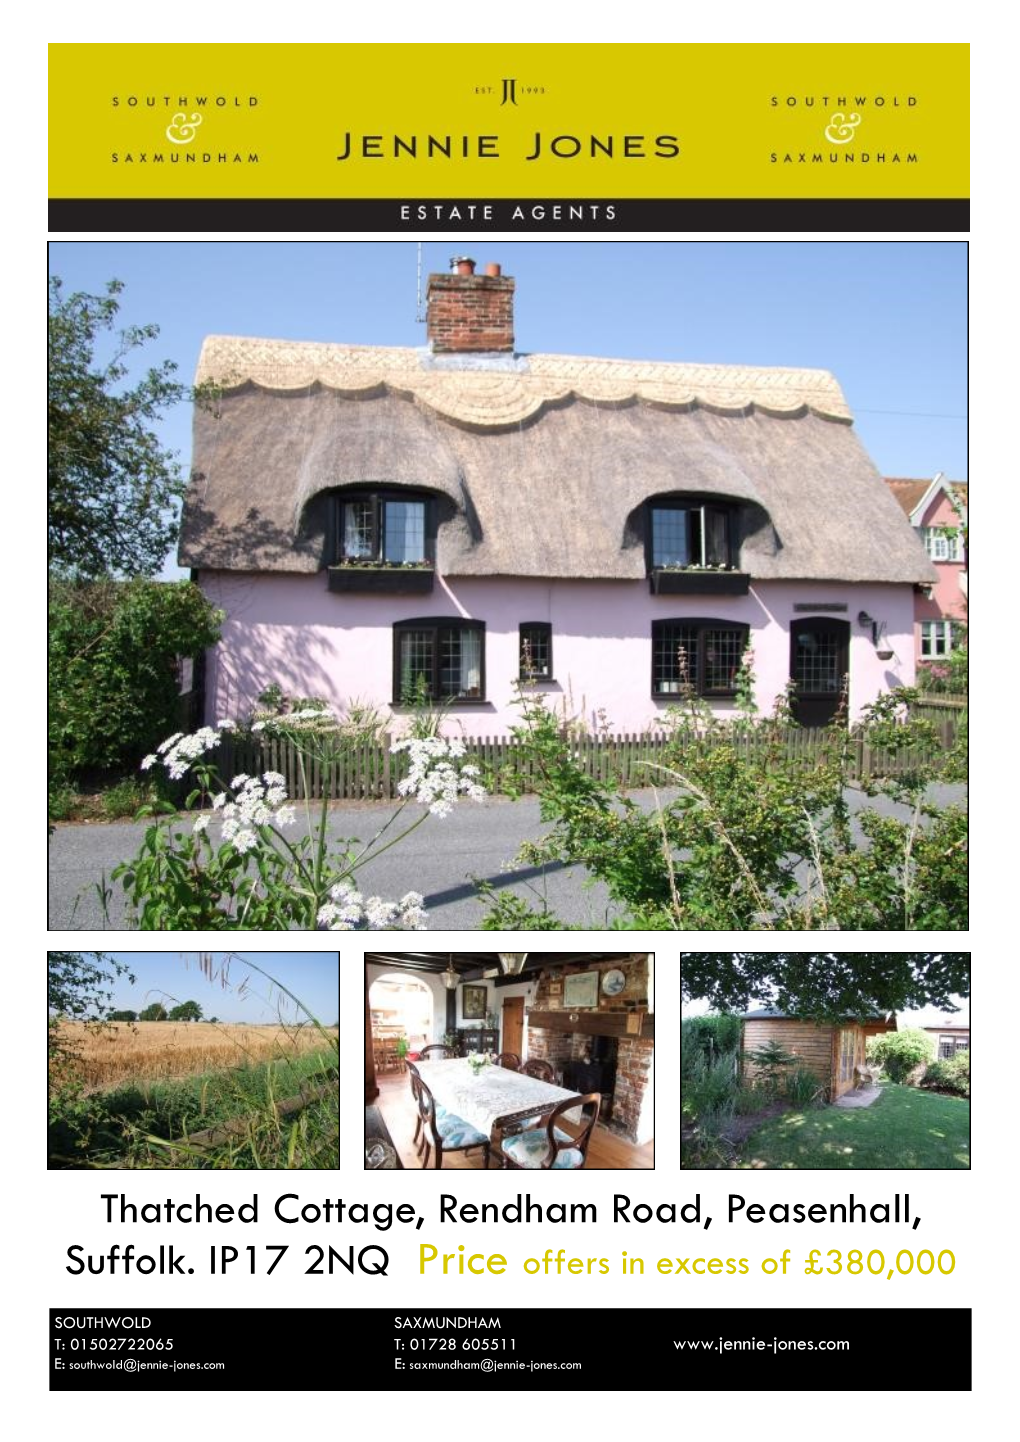 Thatched Cottage, Rendham Road, Peasenhall, Suffolk